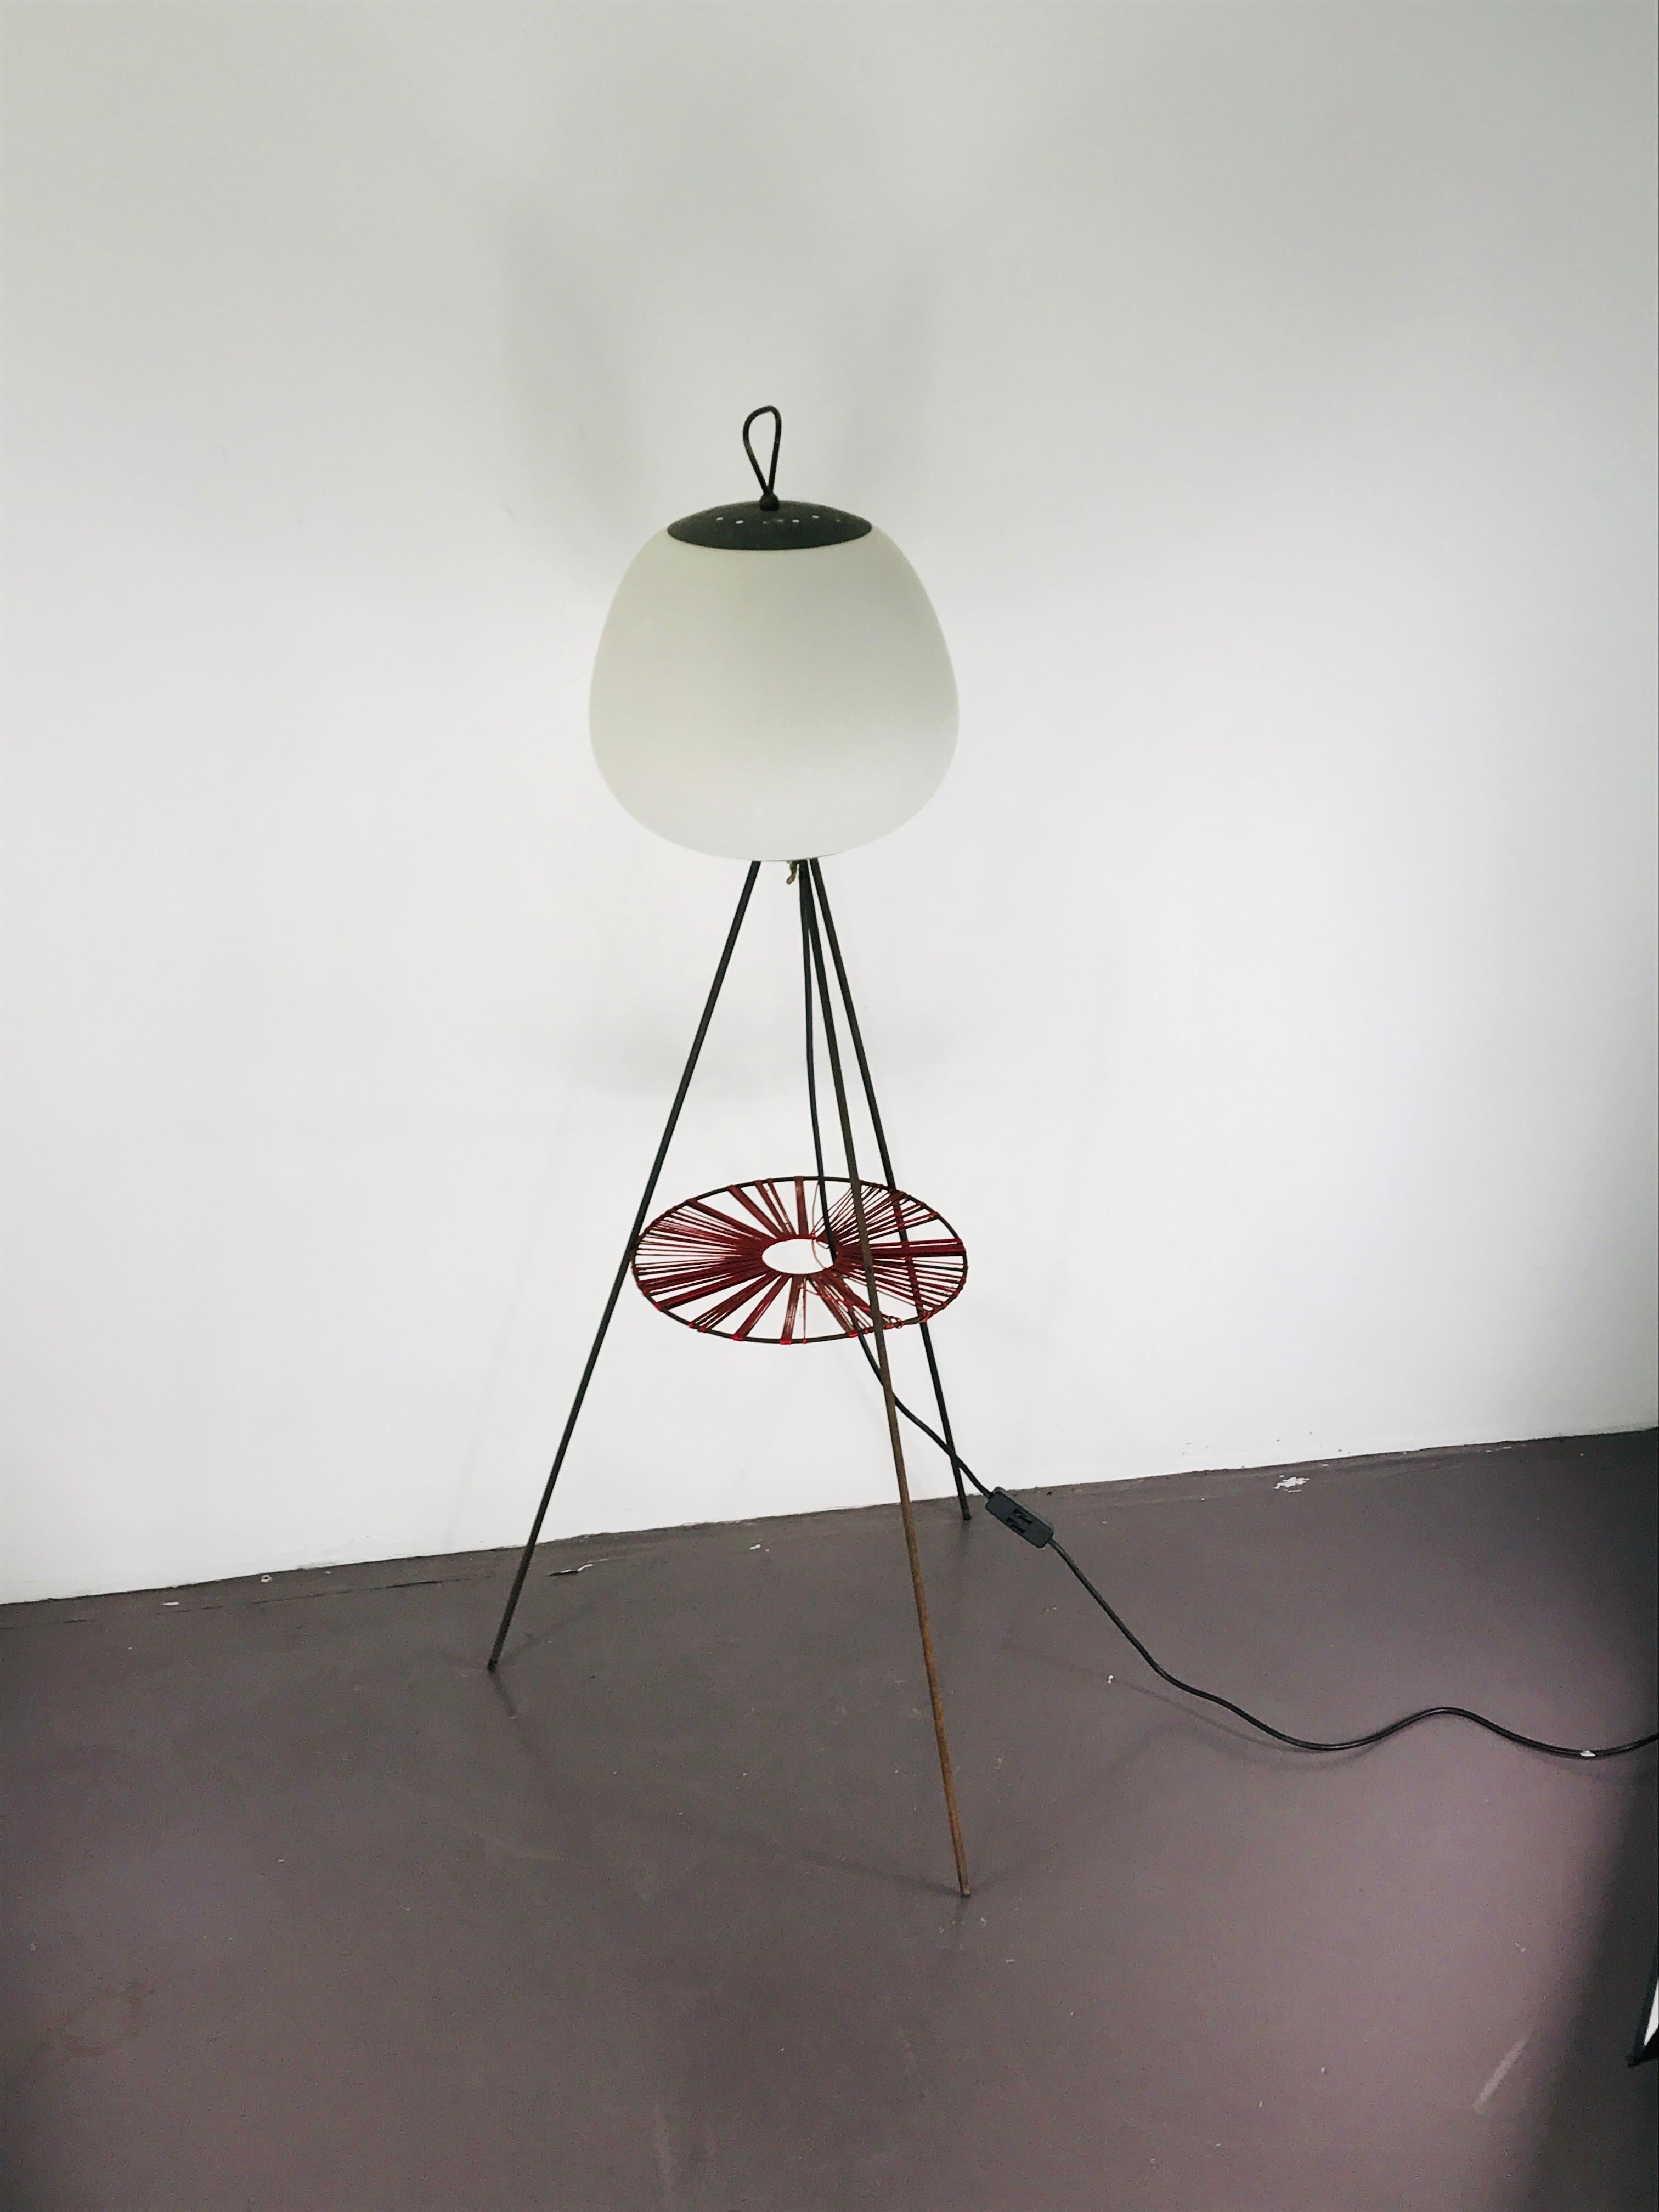 Midcentury Italian Floor Lamp in Glass and Metal Red and Blue Light, 1950 For Sale 2